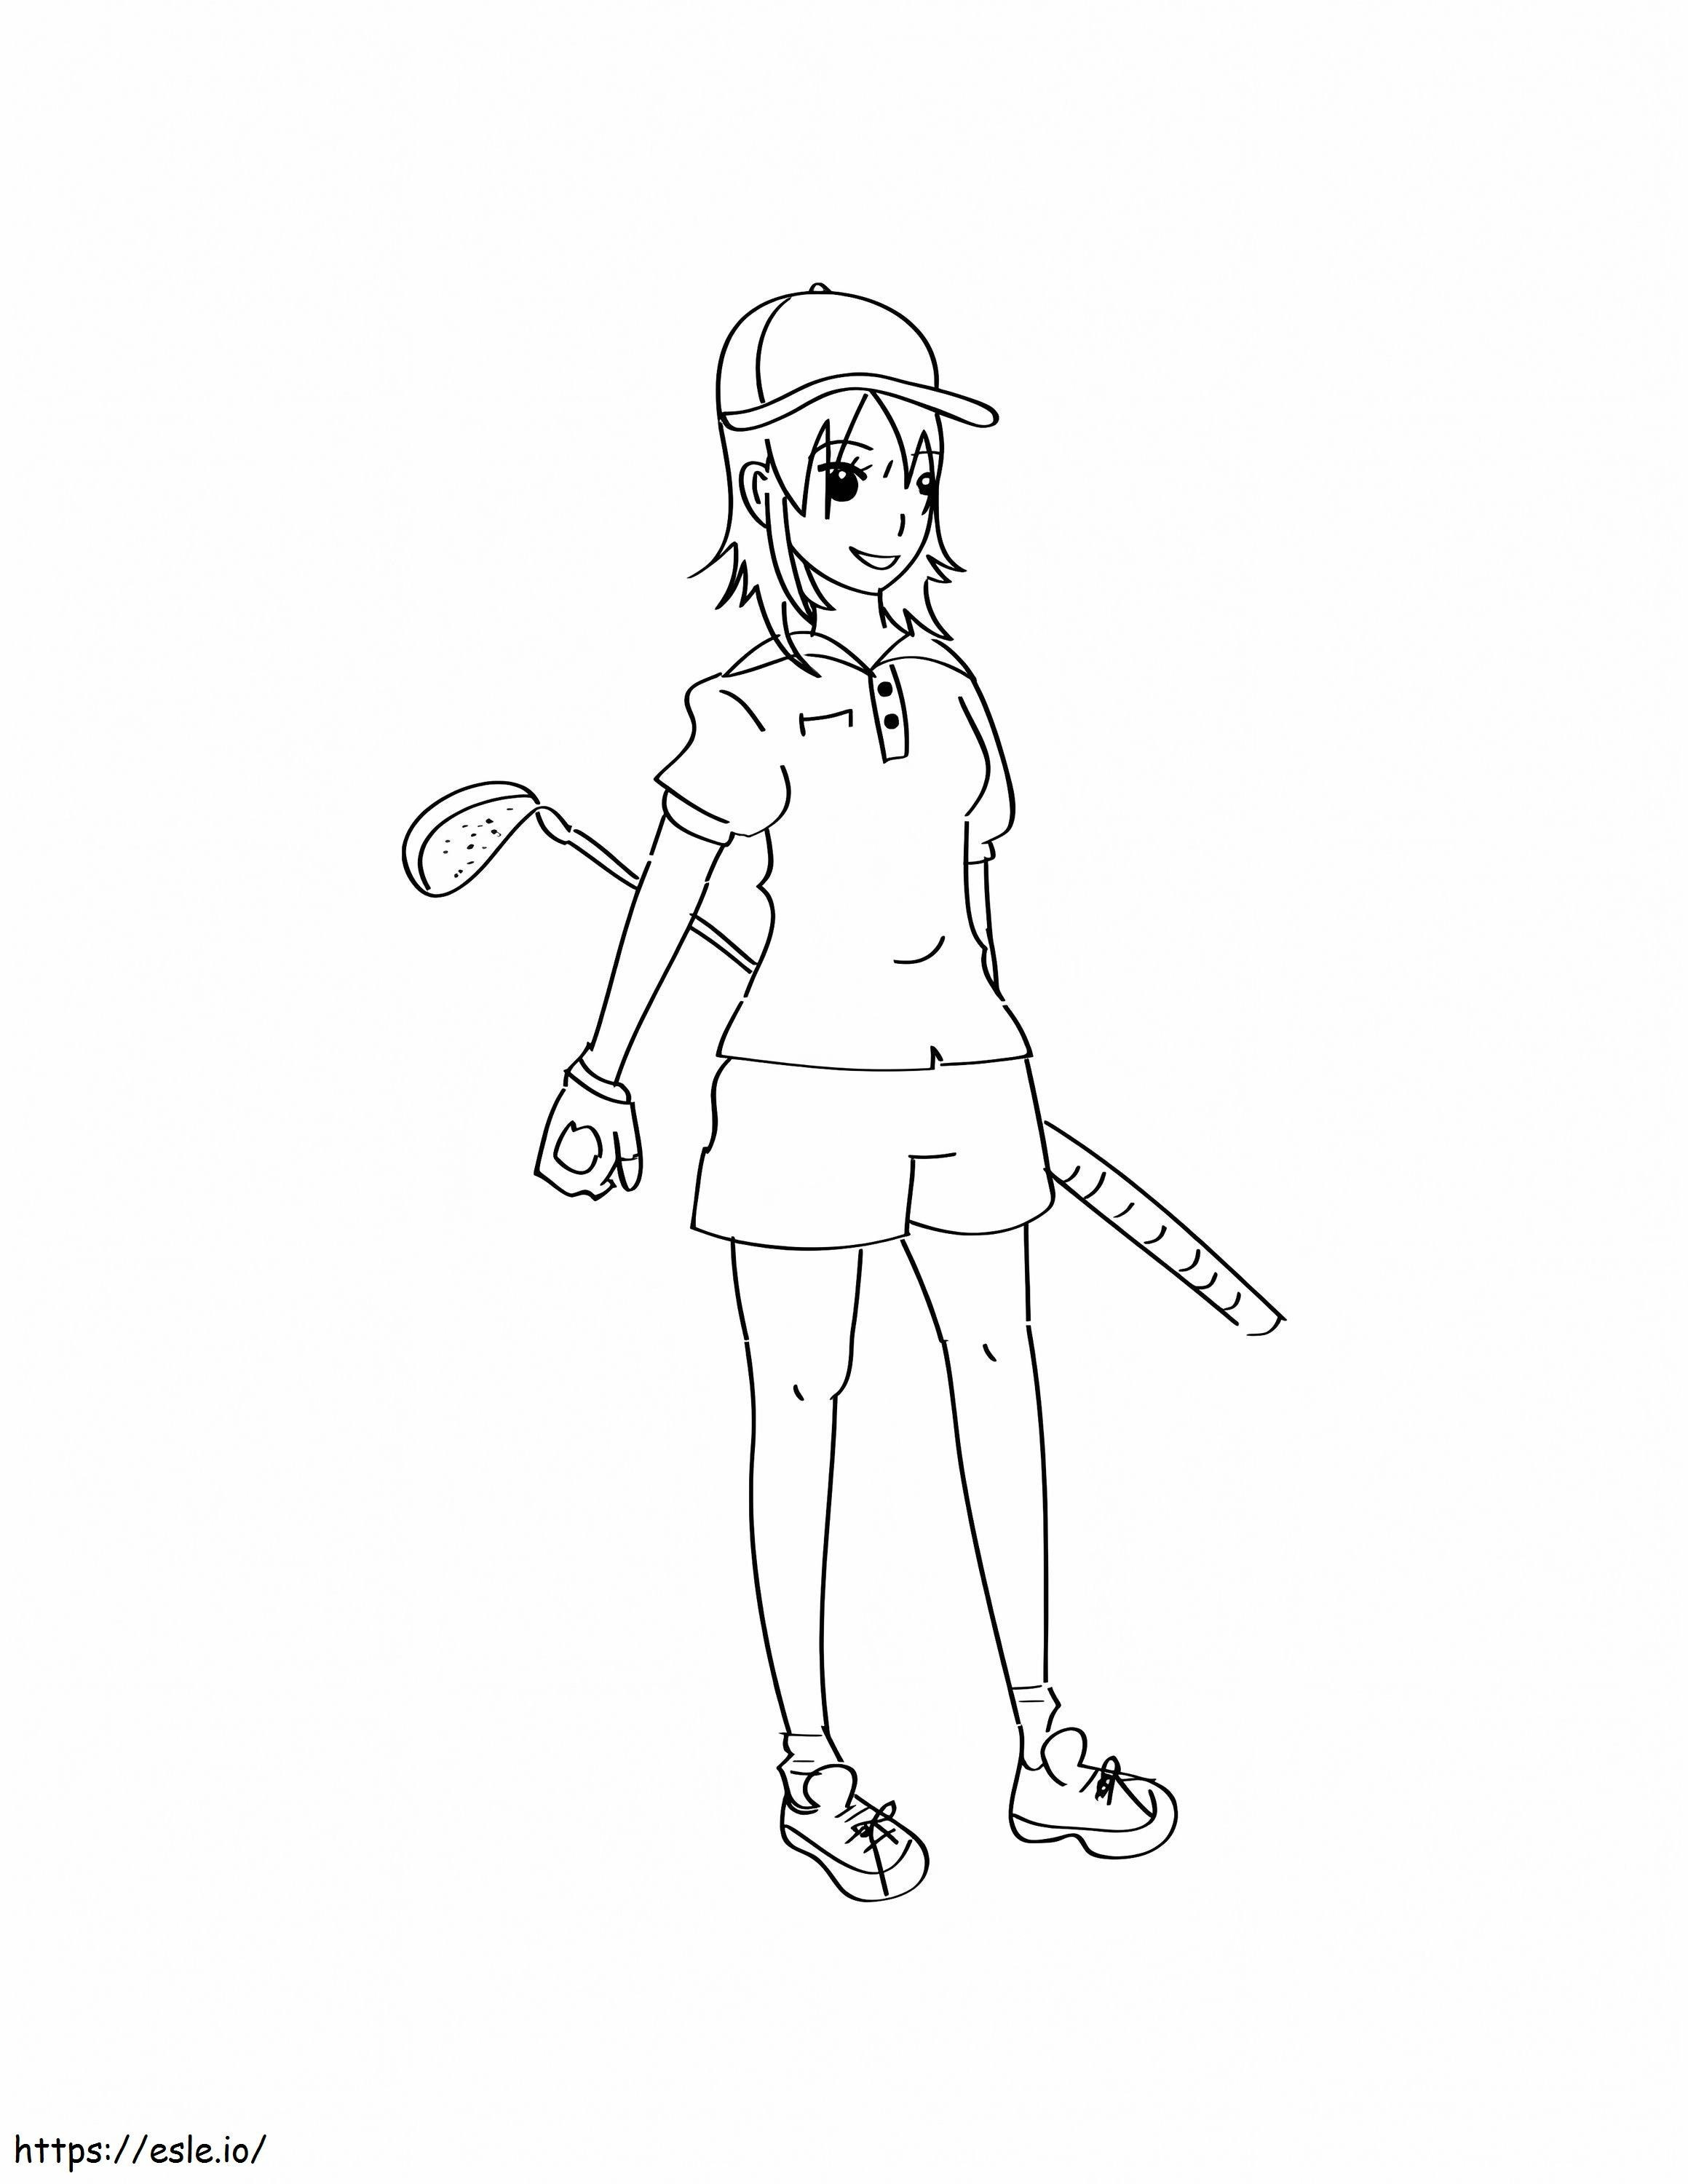 Young Girl Playing Golf coloring page